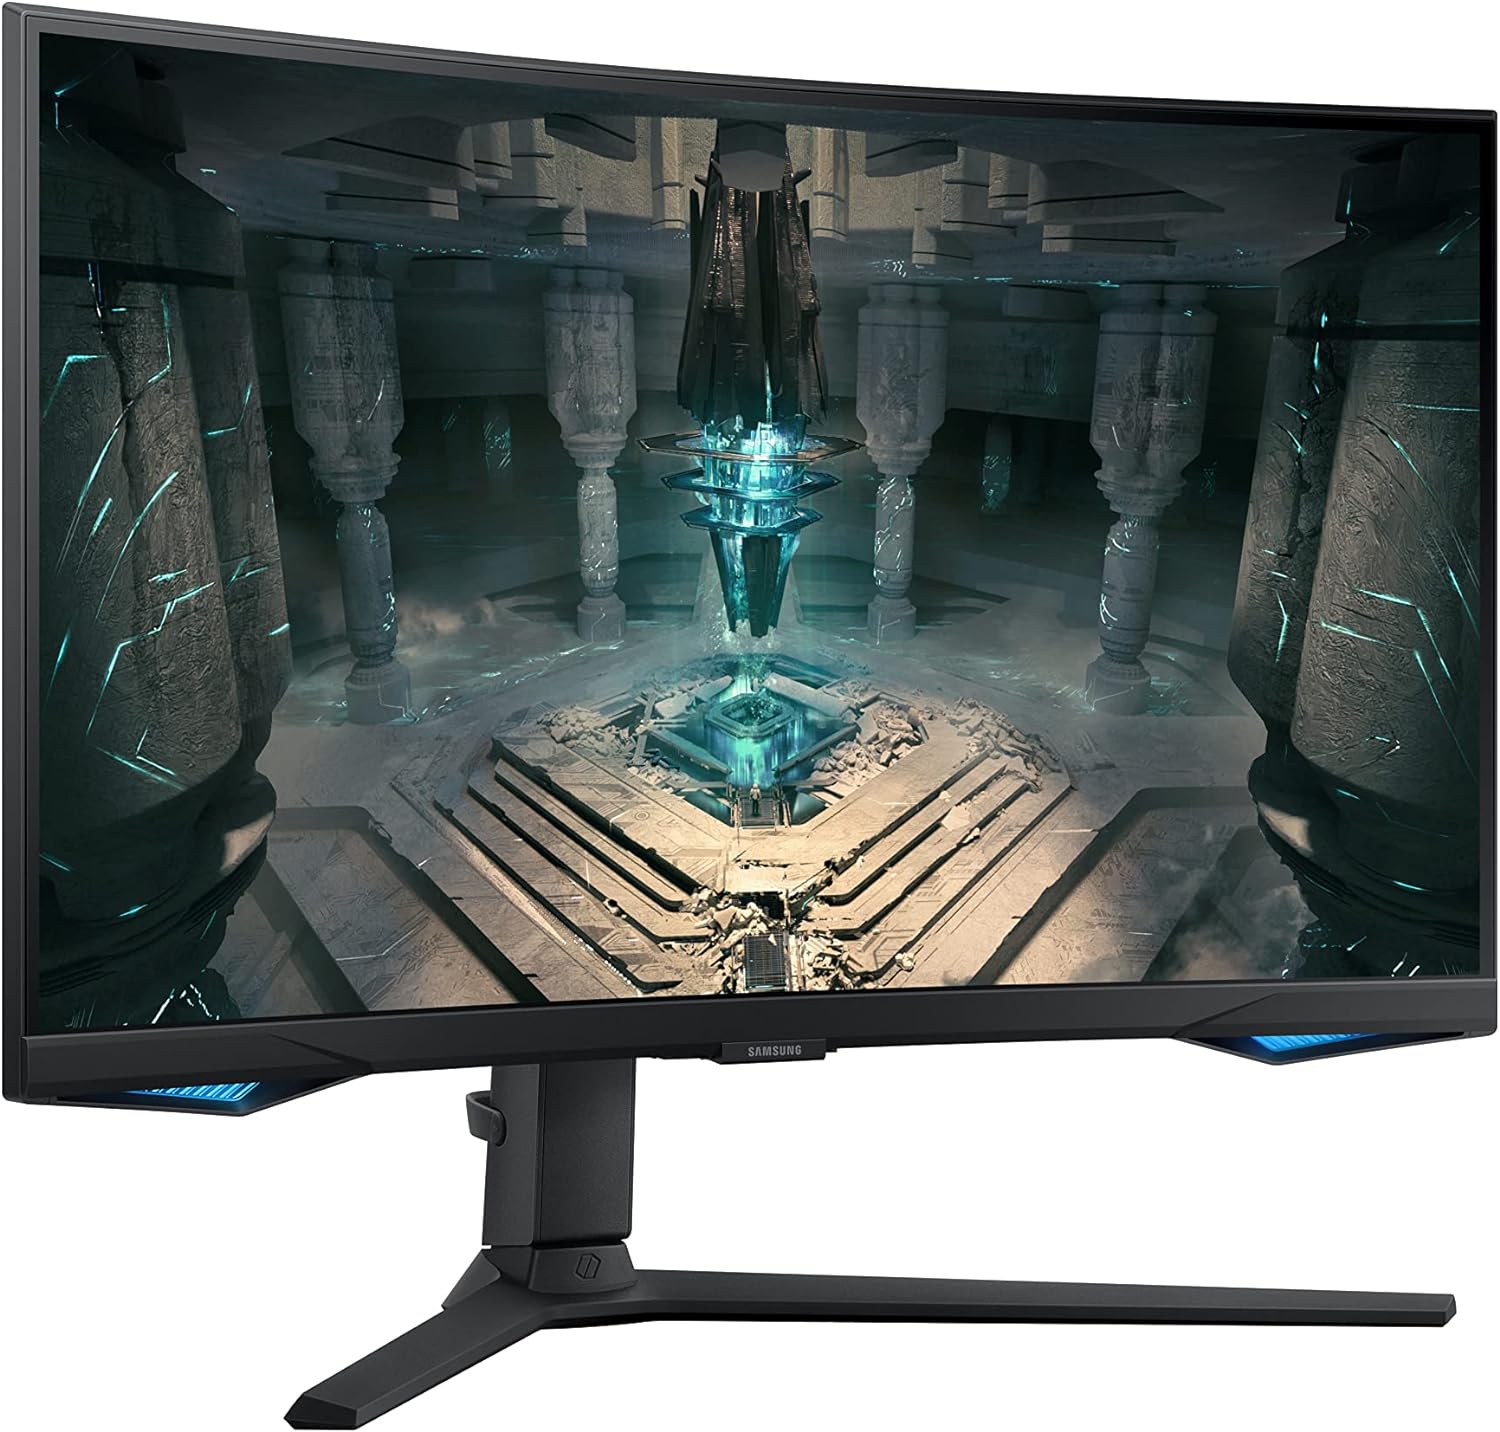 Samsung Odyssey G6 LS32BG650EUXXU 32" Curved Smart Gaming Monitor with Speakers - QHD 2560x1440, 240Hz, 1ms, Speakers, HDMI 2.1, Full Smart Platform, Freesync Premium Pro, Height Adjust   Import  Single ASIN  Import  Multiple ASIN ×Product custom - Amazing Gadgets Outlet